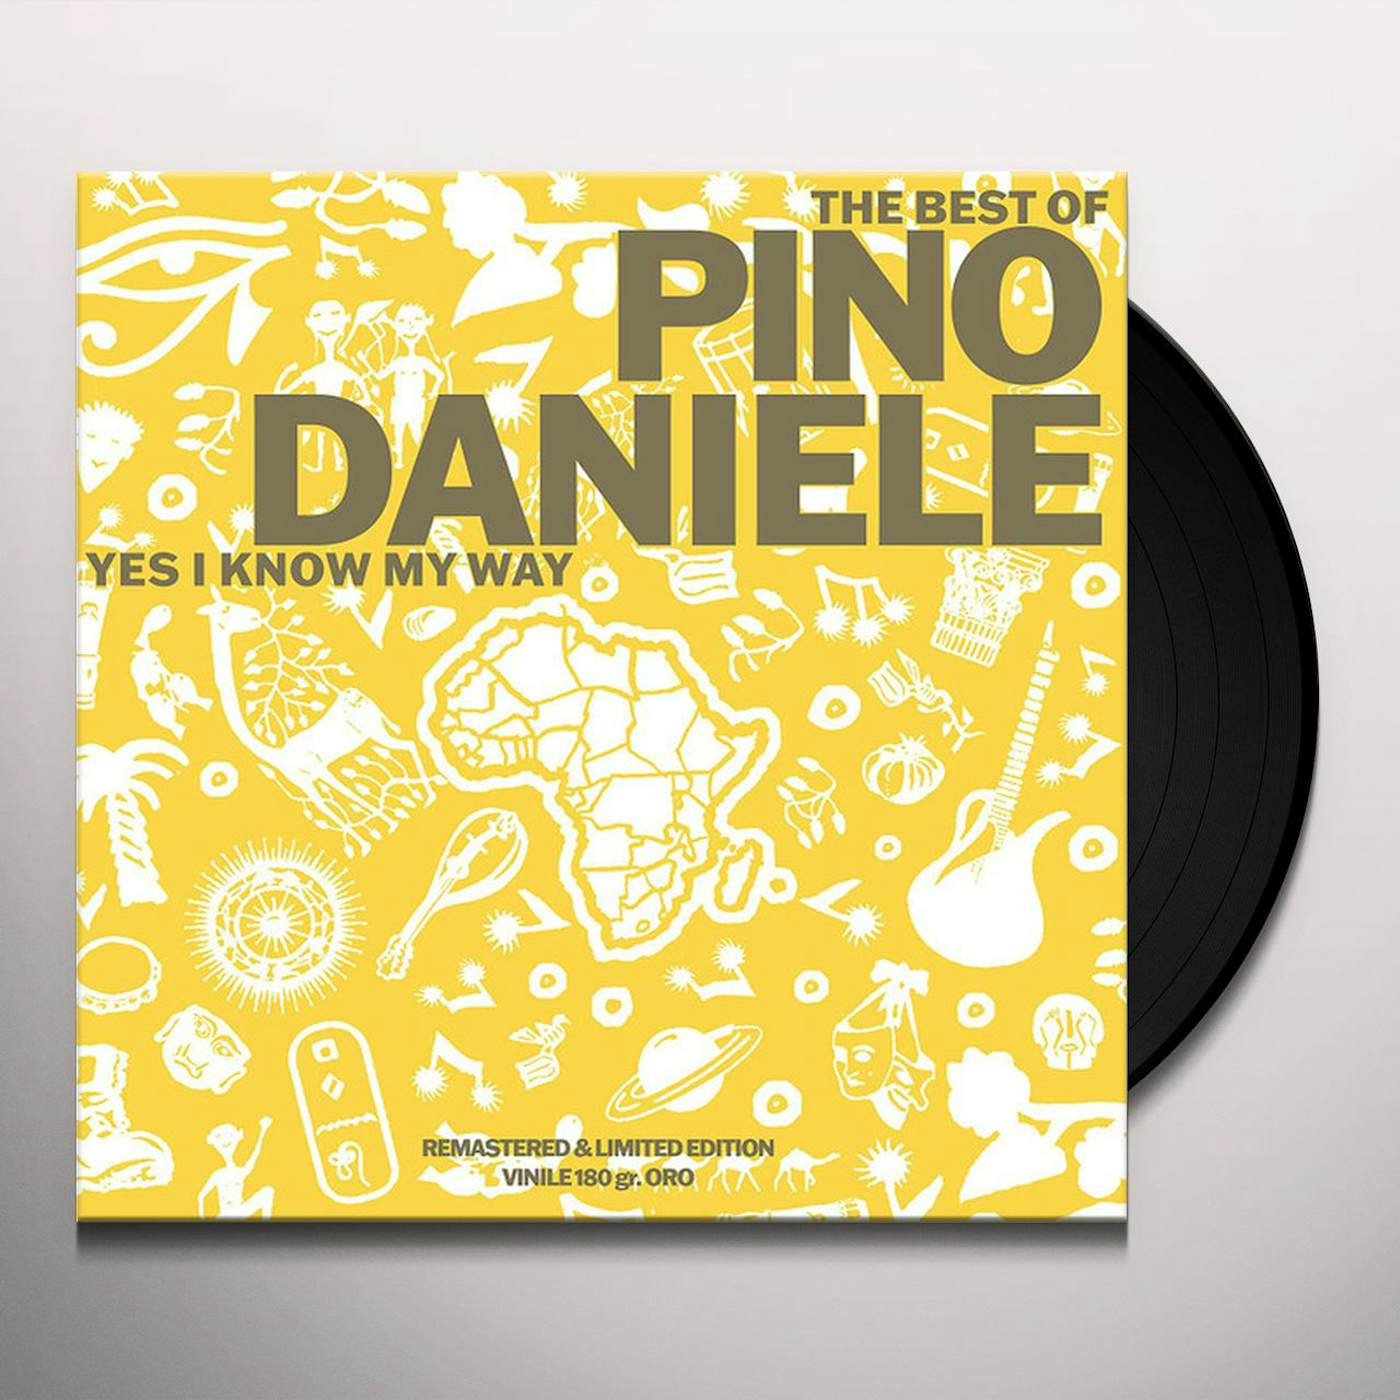 On Sale Pino Daniele YES I KNOW MY WAY: BEST OF Vinyl Record $52.99$39.49